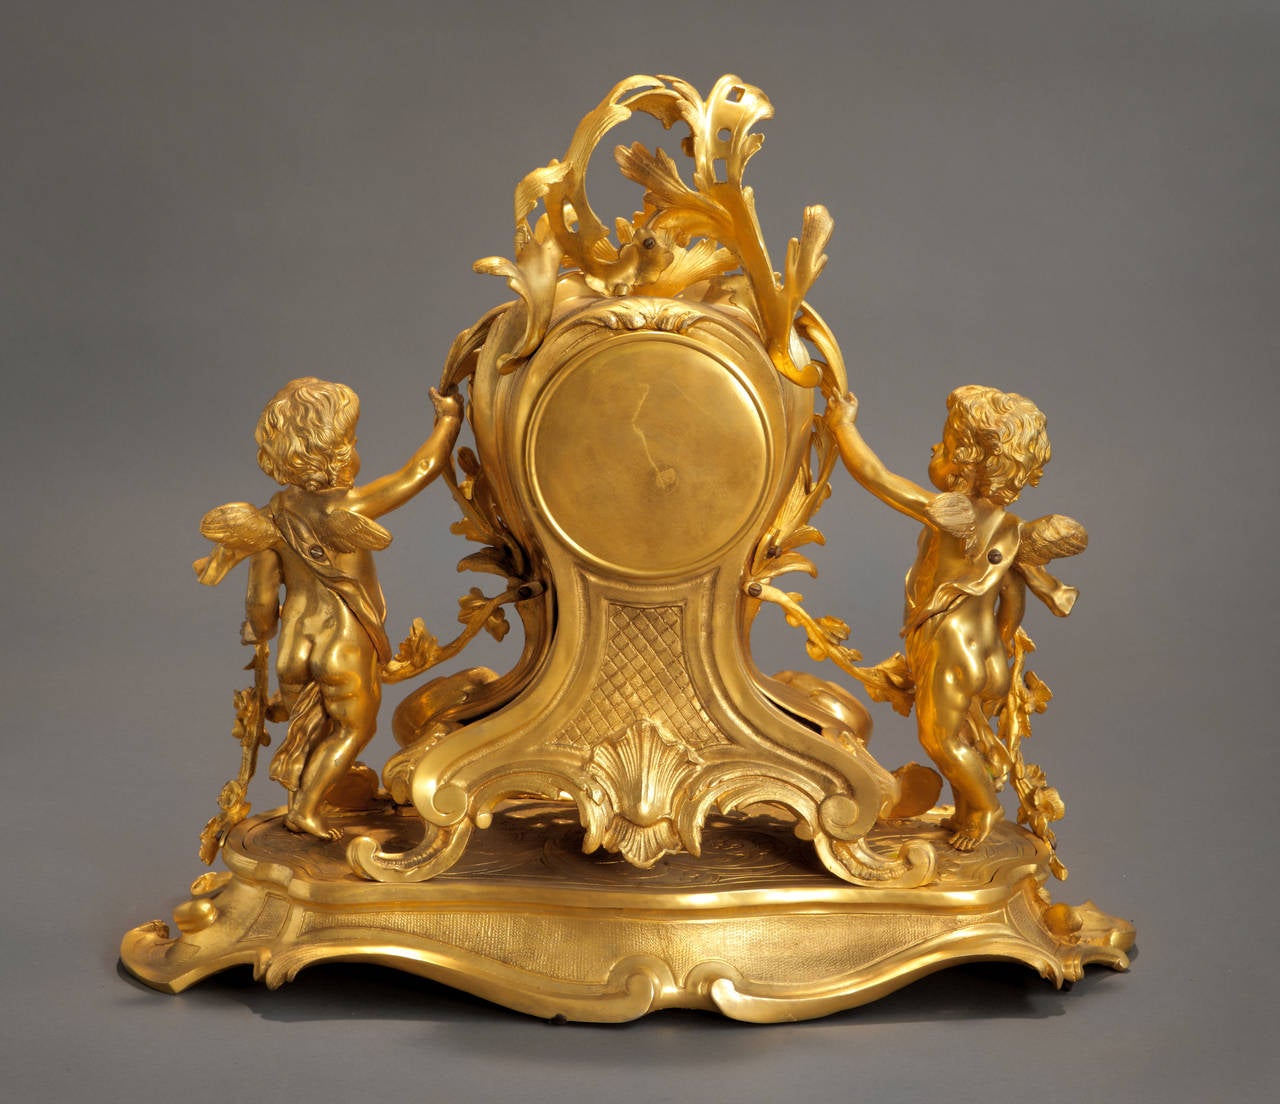 A 19th century French gilt bronze figural cherub desk clock,

Paris, Circa 1890

Having two winged cherubs on each side of the gold and black numerical dial.

Dimensions: Height: 22